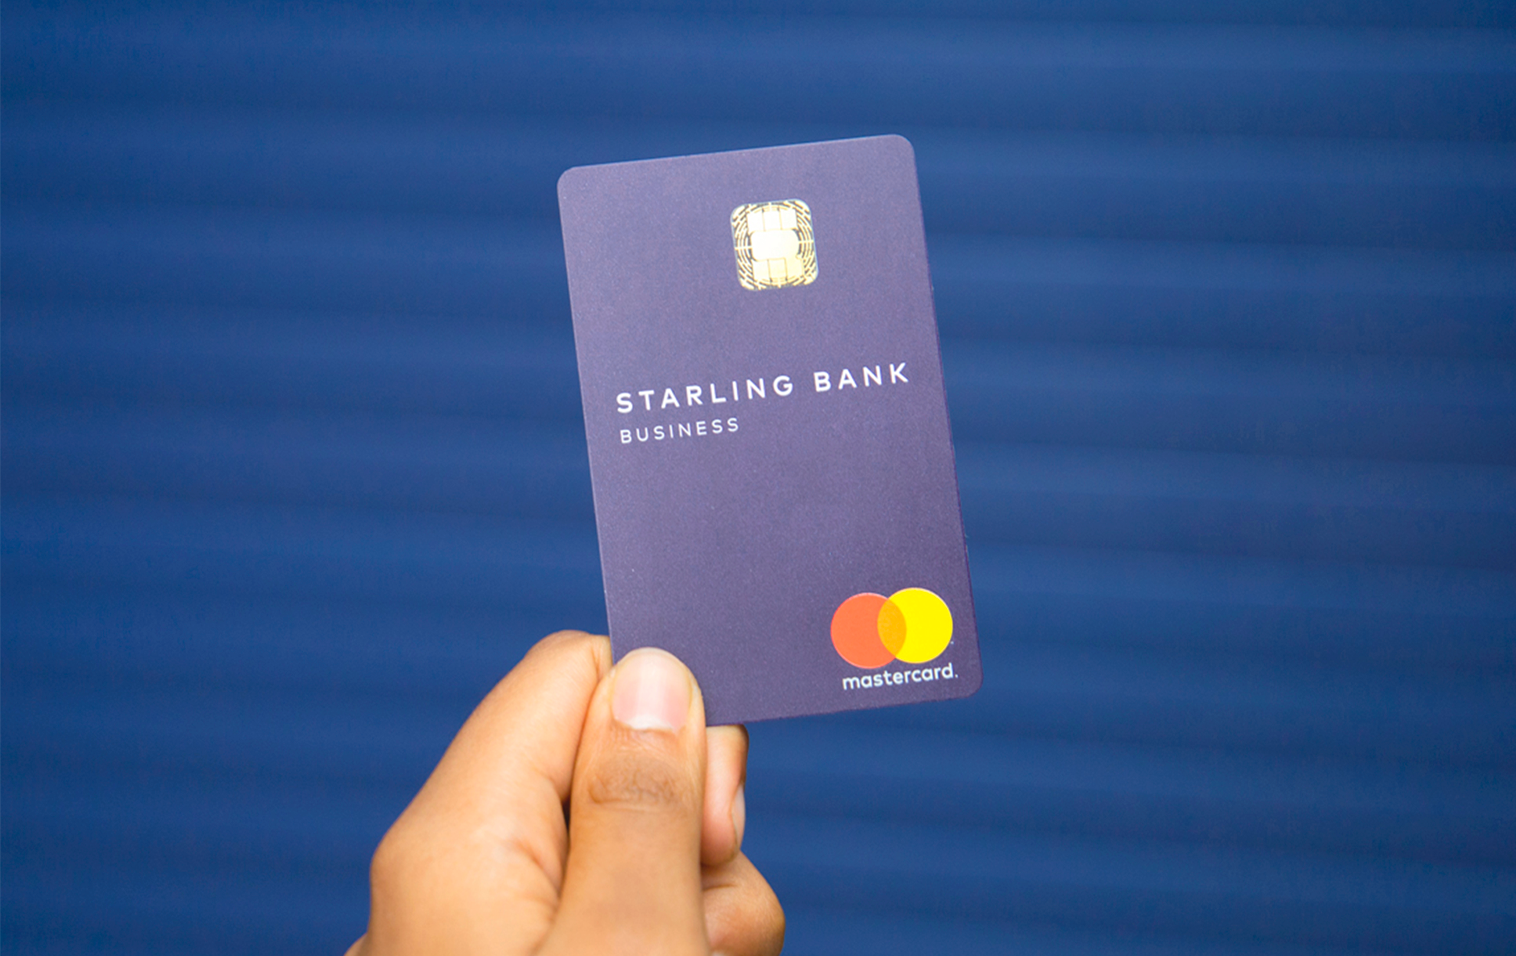 Working at Starling Bank: new way to reshape industry